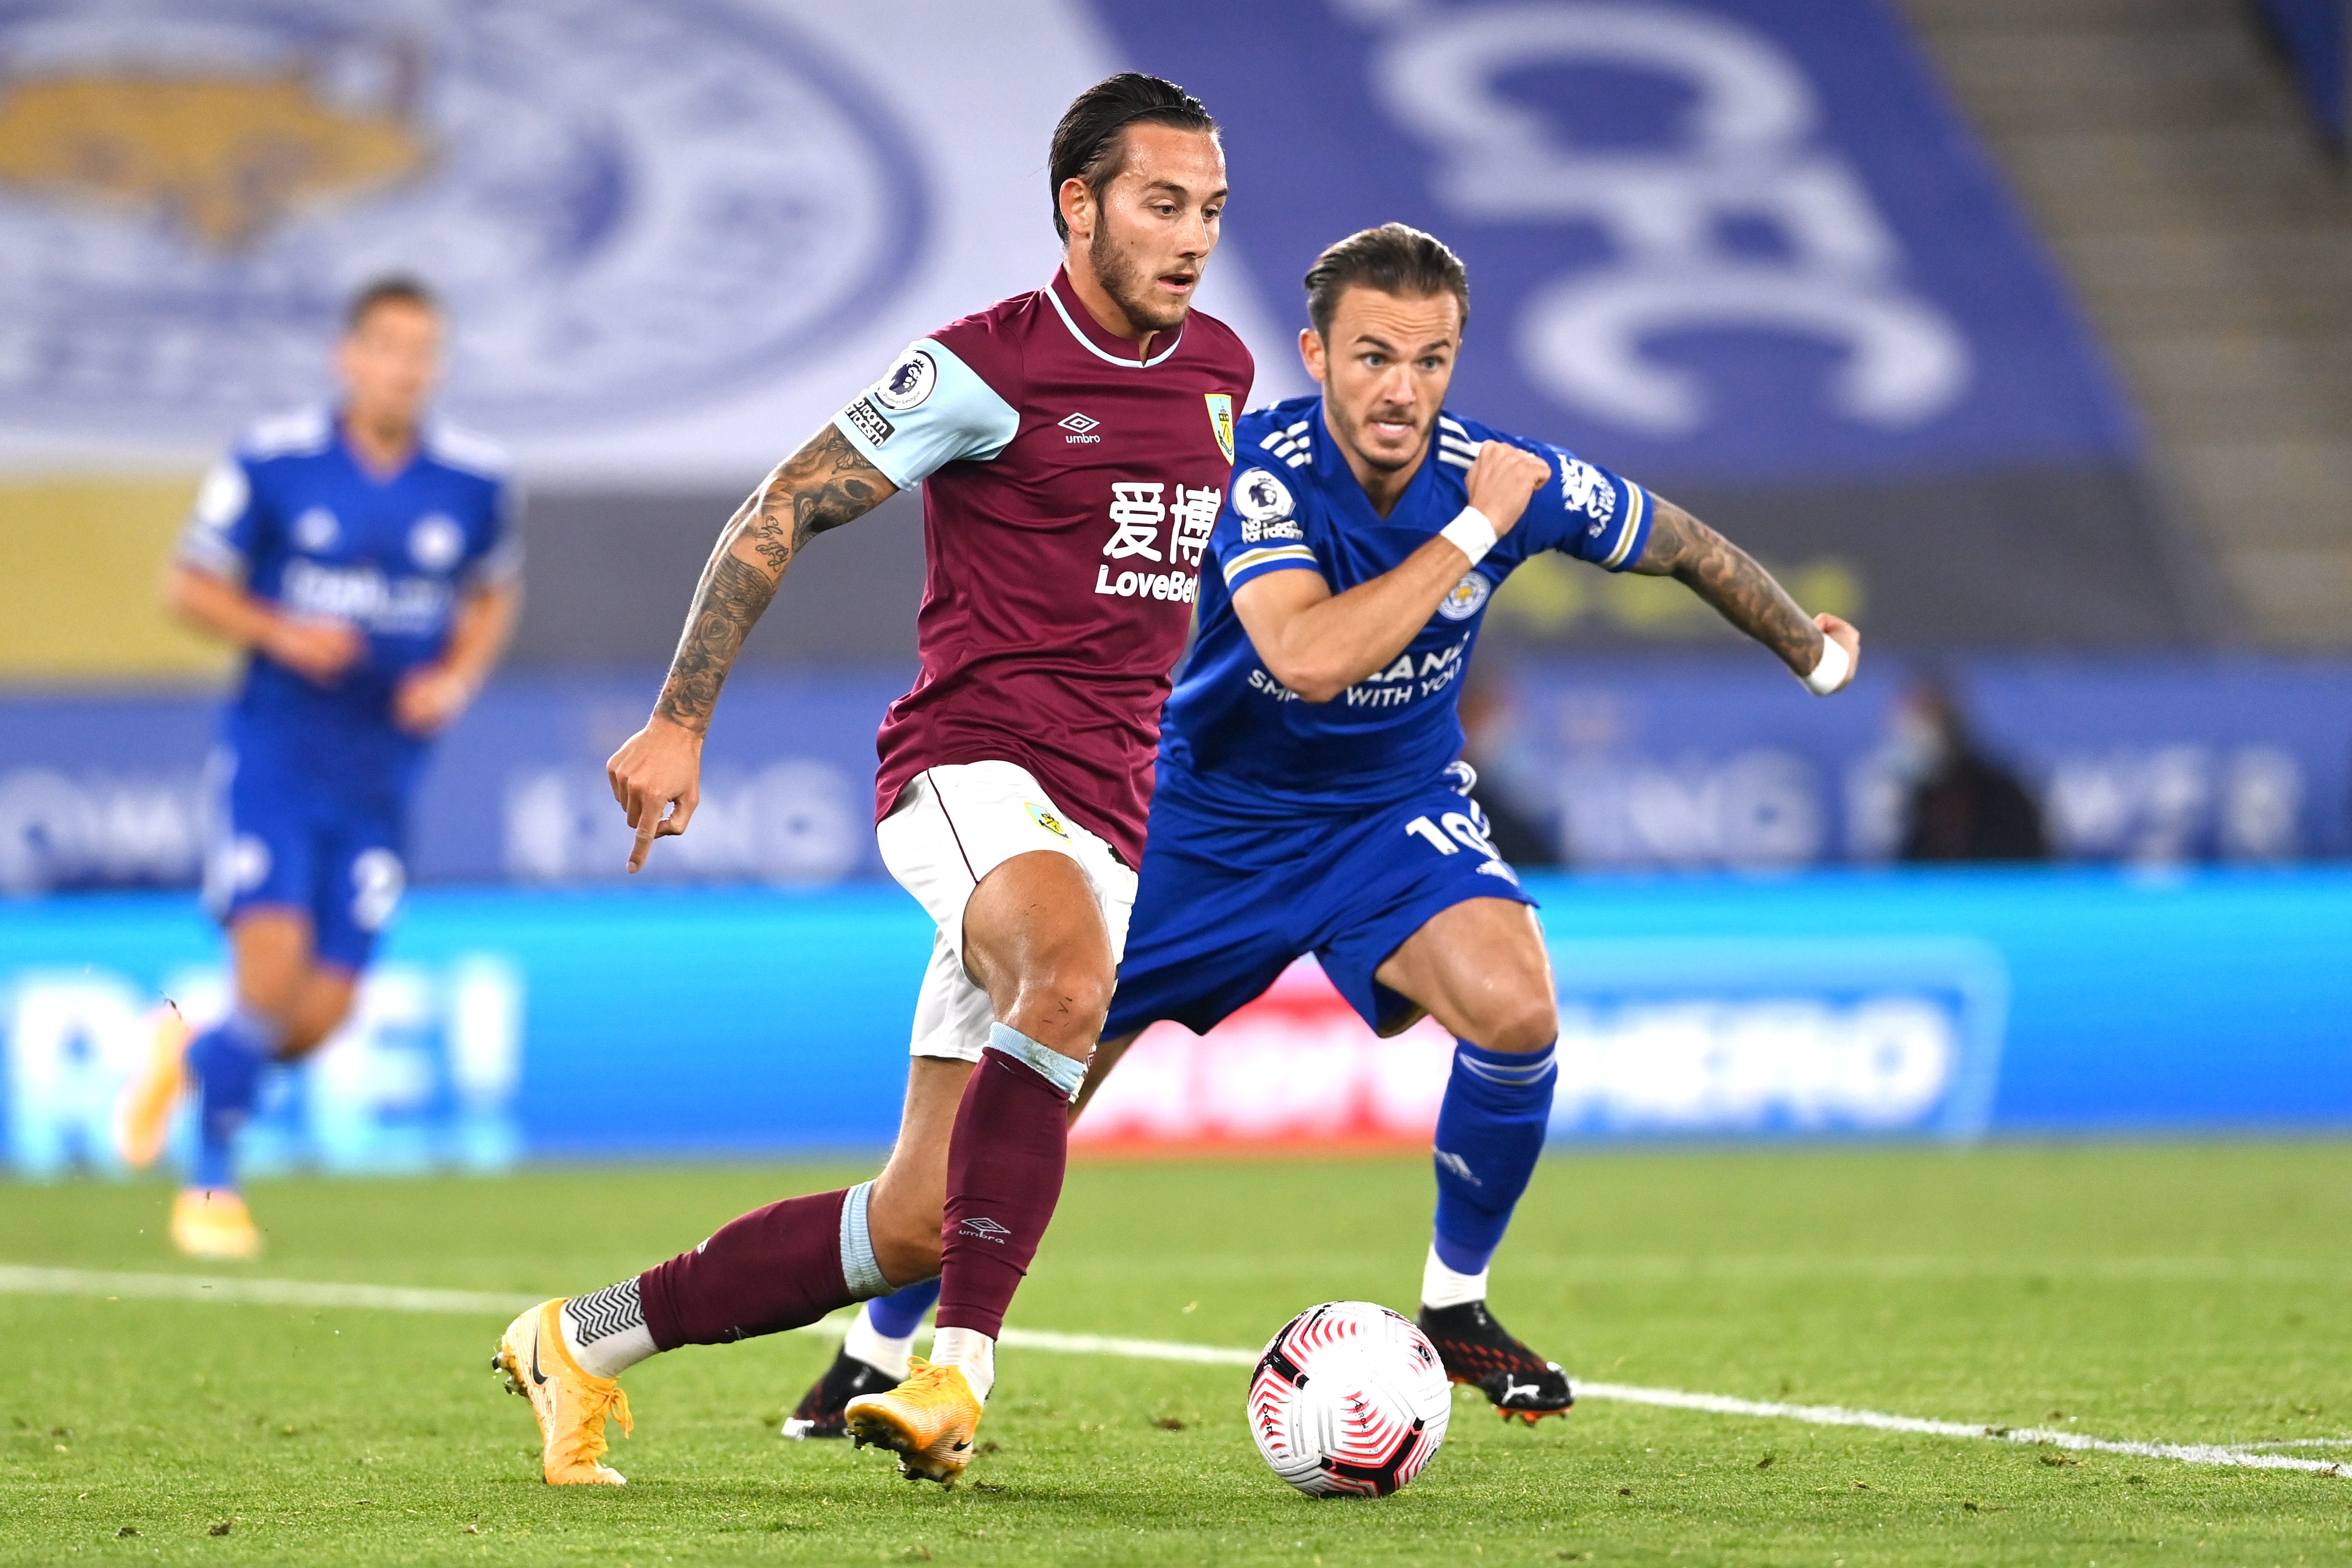 Leicester welcome Burnley to the King Power Stadium